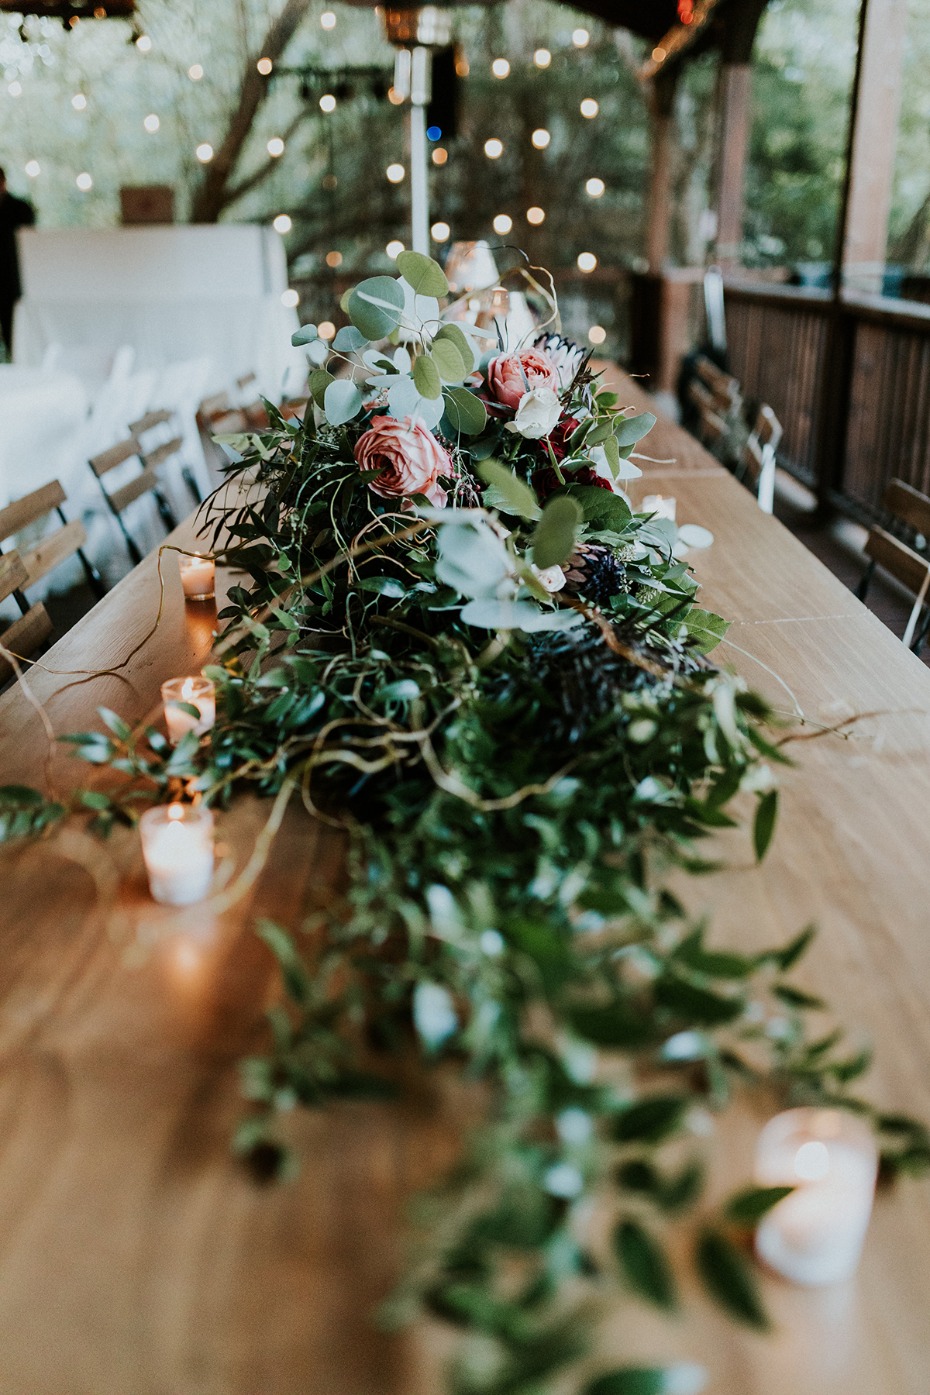 Green and floral centerpiece